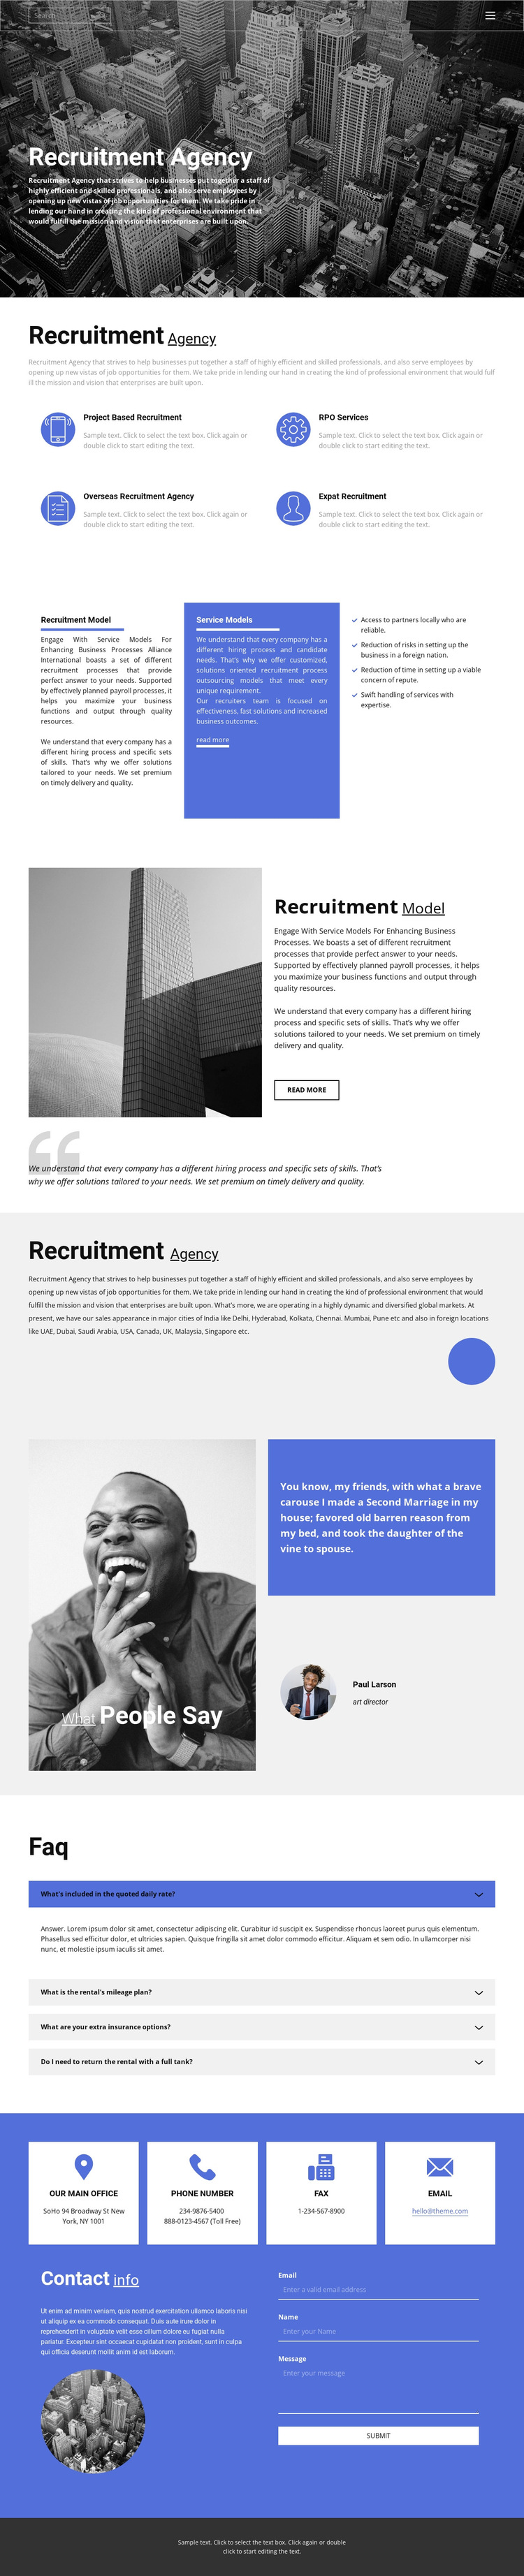 Recruiting agency with good experience HTML5 Template